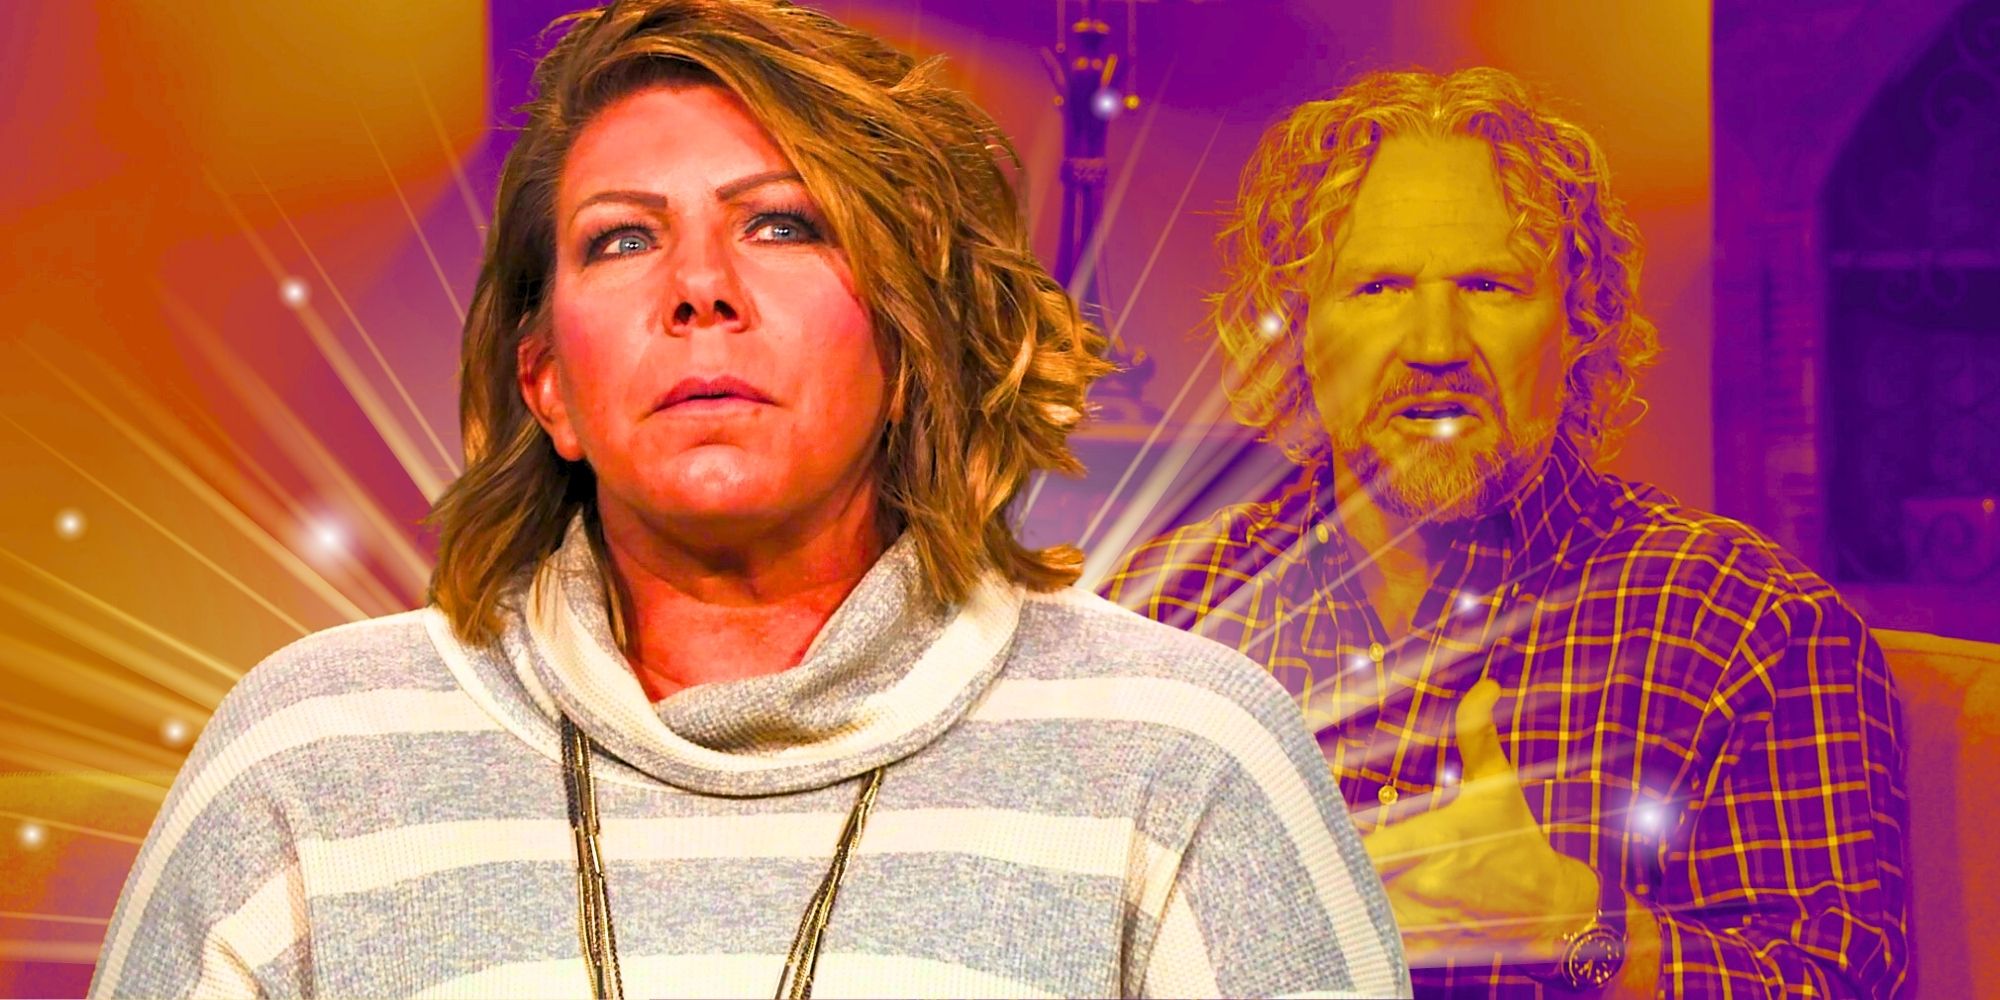 Sister Wives' Meri Brown with kody behind her with purple, red, and yellow filtered background